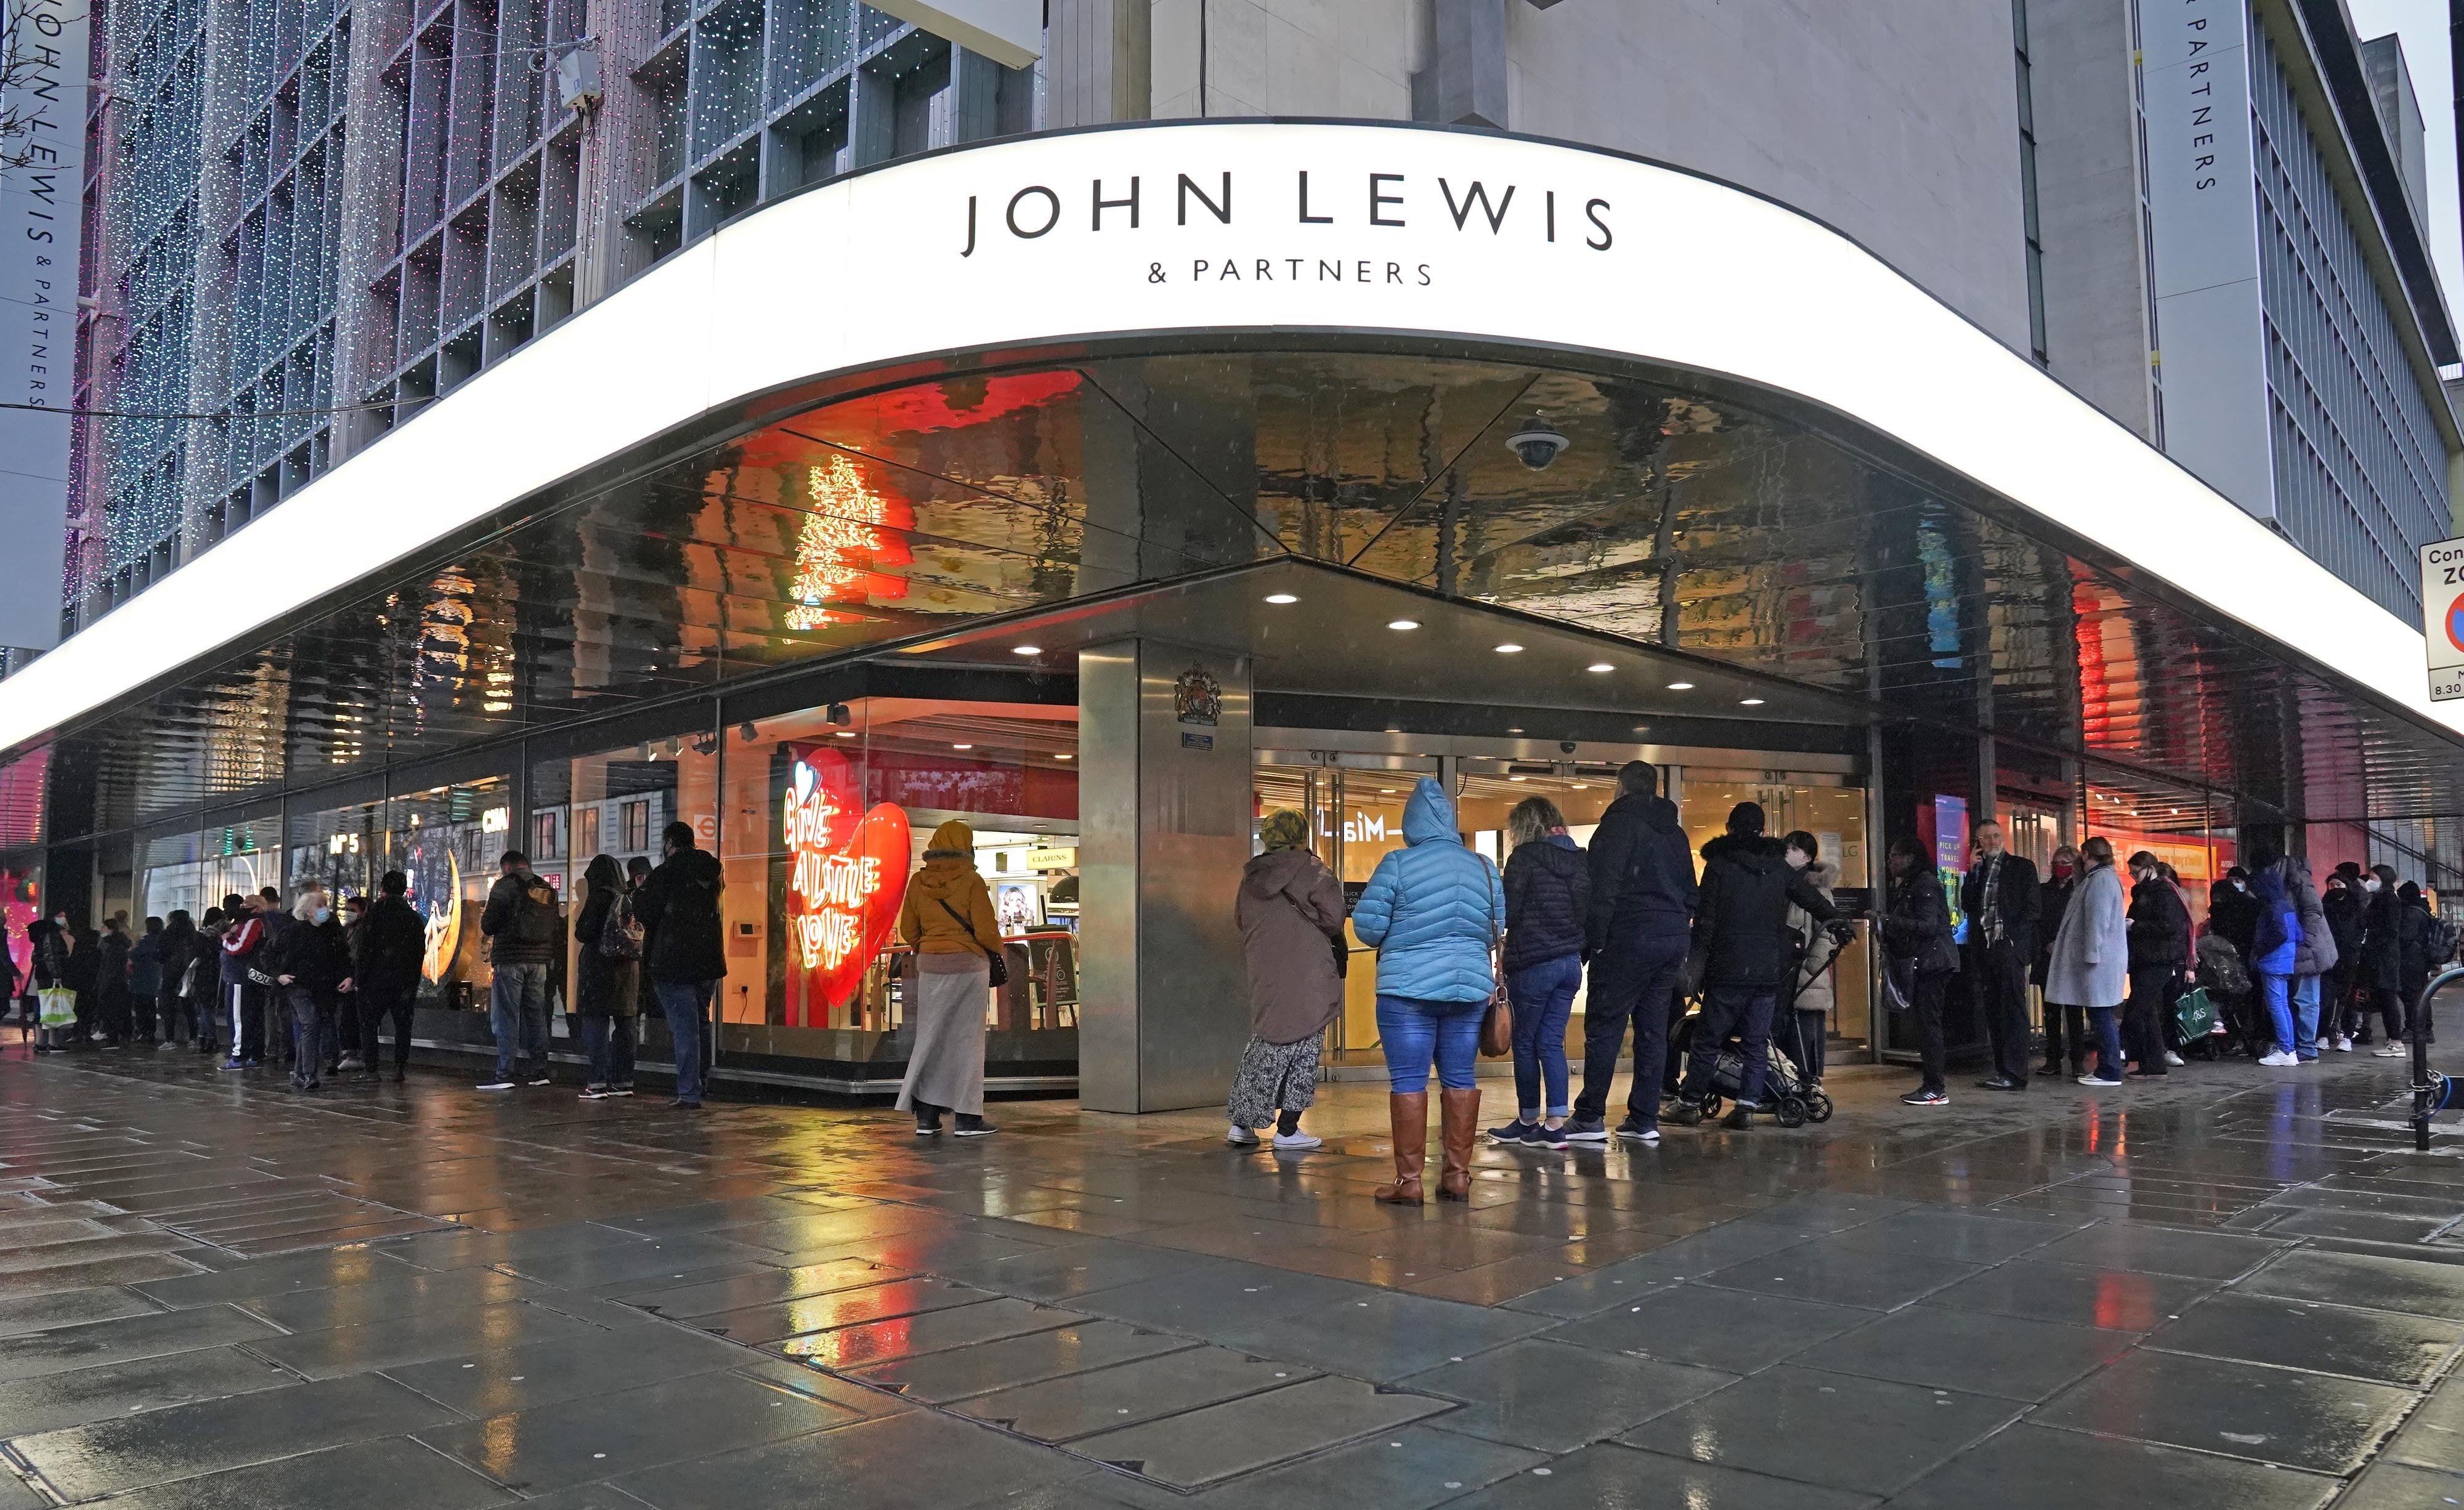 John Lewis said it would invest £500 million to keep prices down (Jonathan Brady/PA)